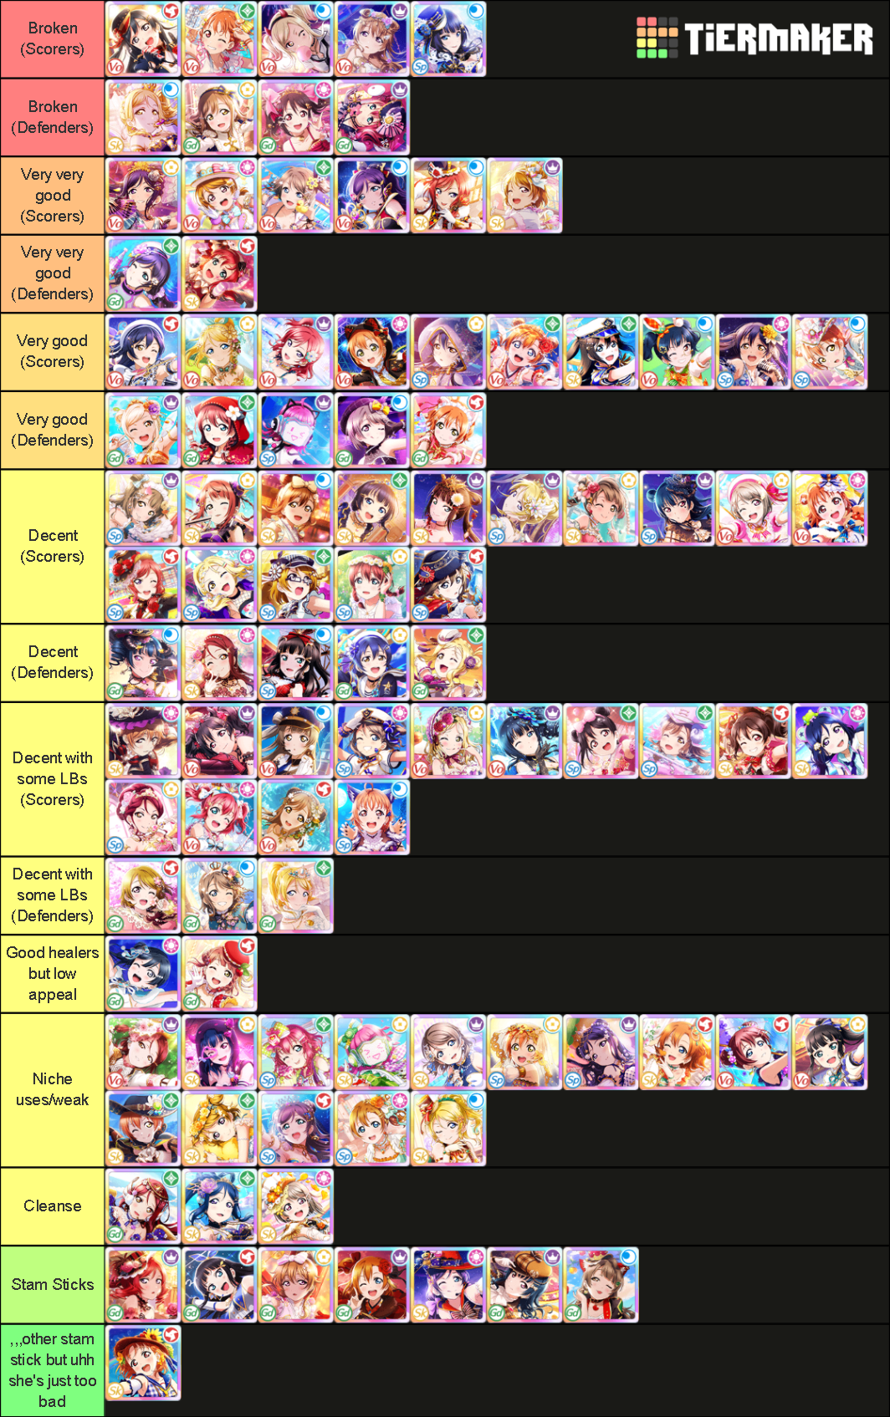 I also decided to do a SIFAS UR tier list!